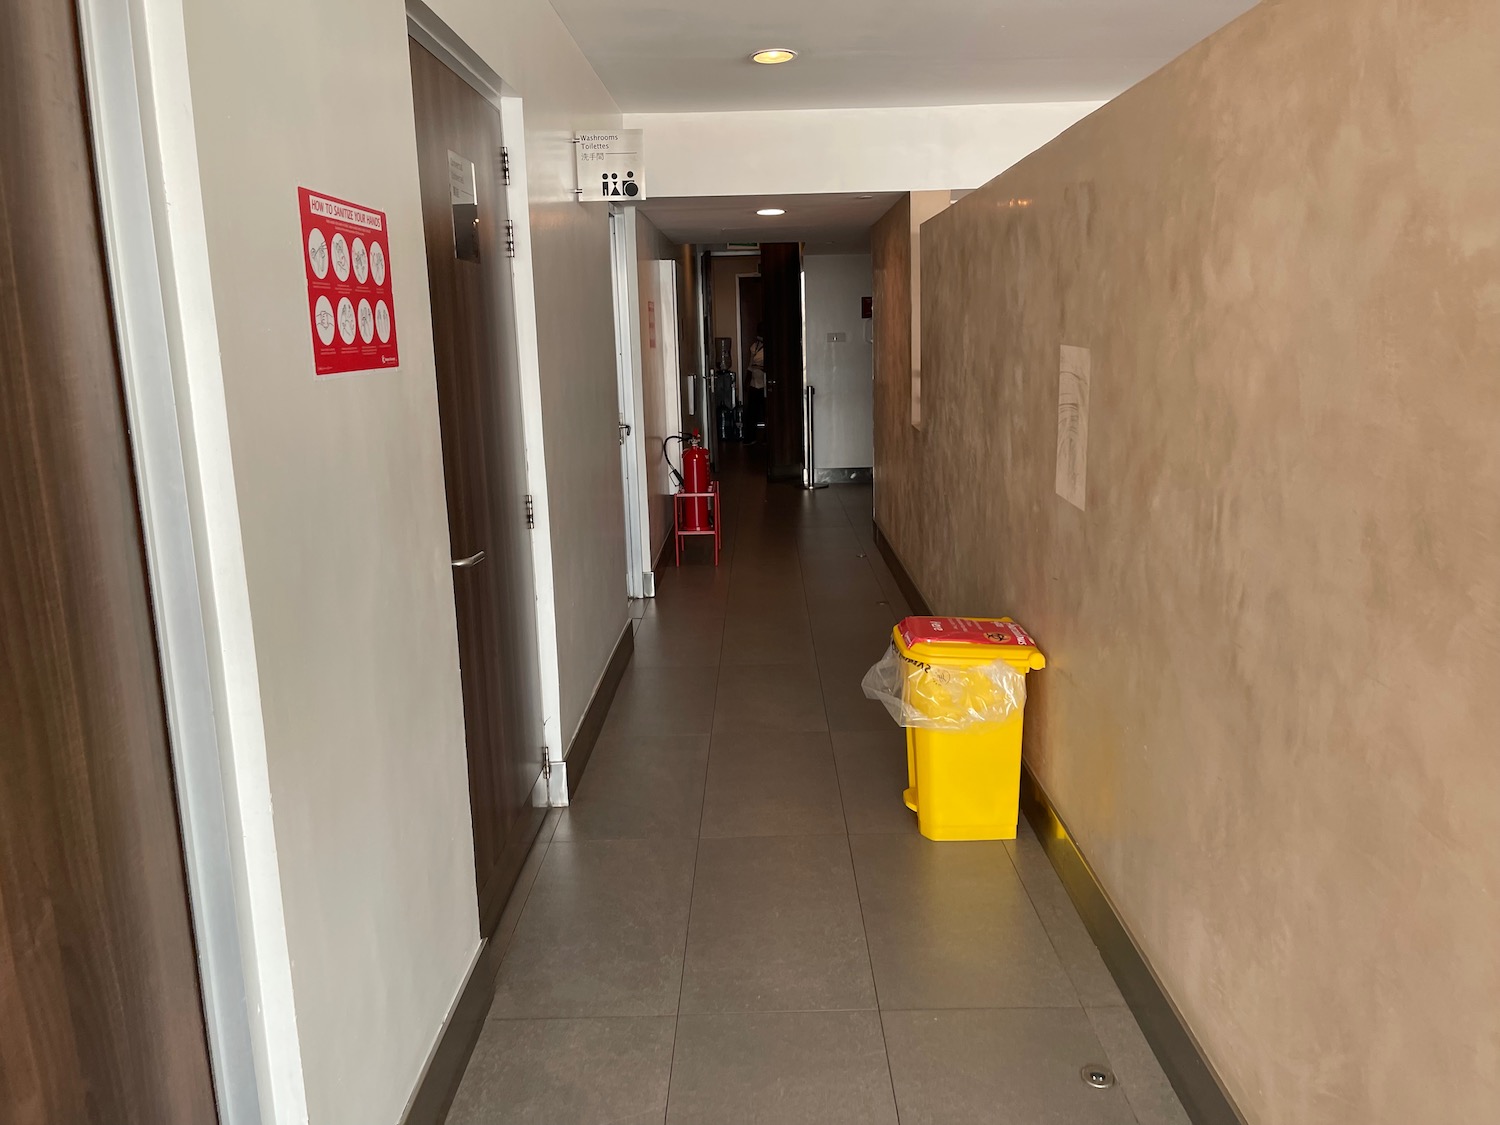 a hallway with a yellow trash can